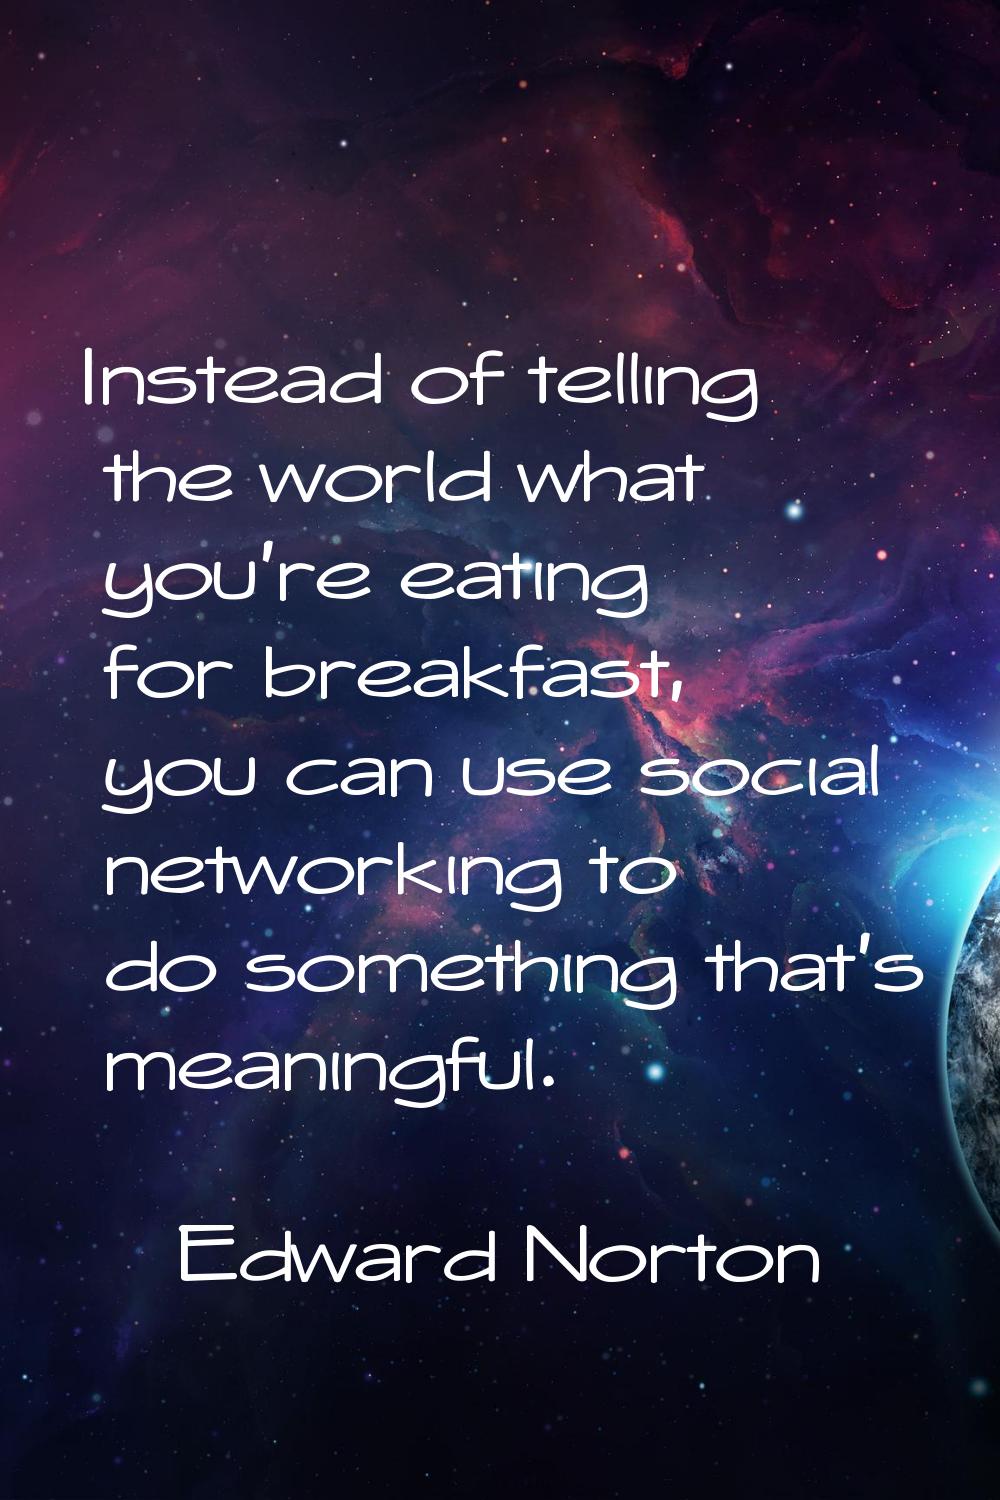 Instead of telling the world what you're eating for breakfast, you can use social networking to do 